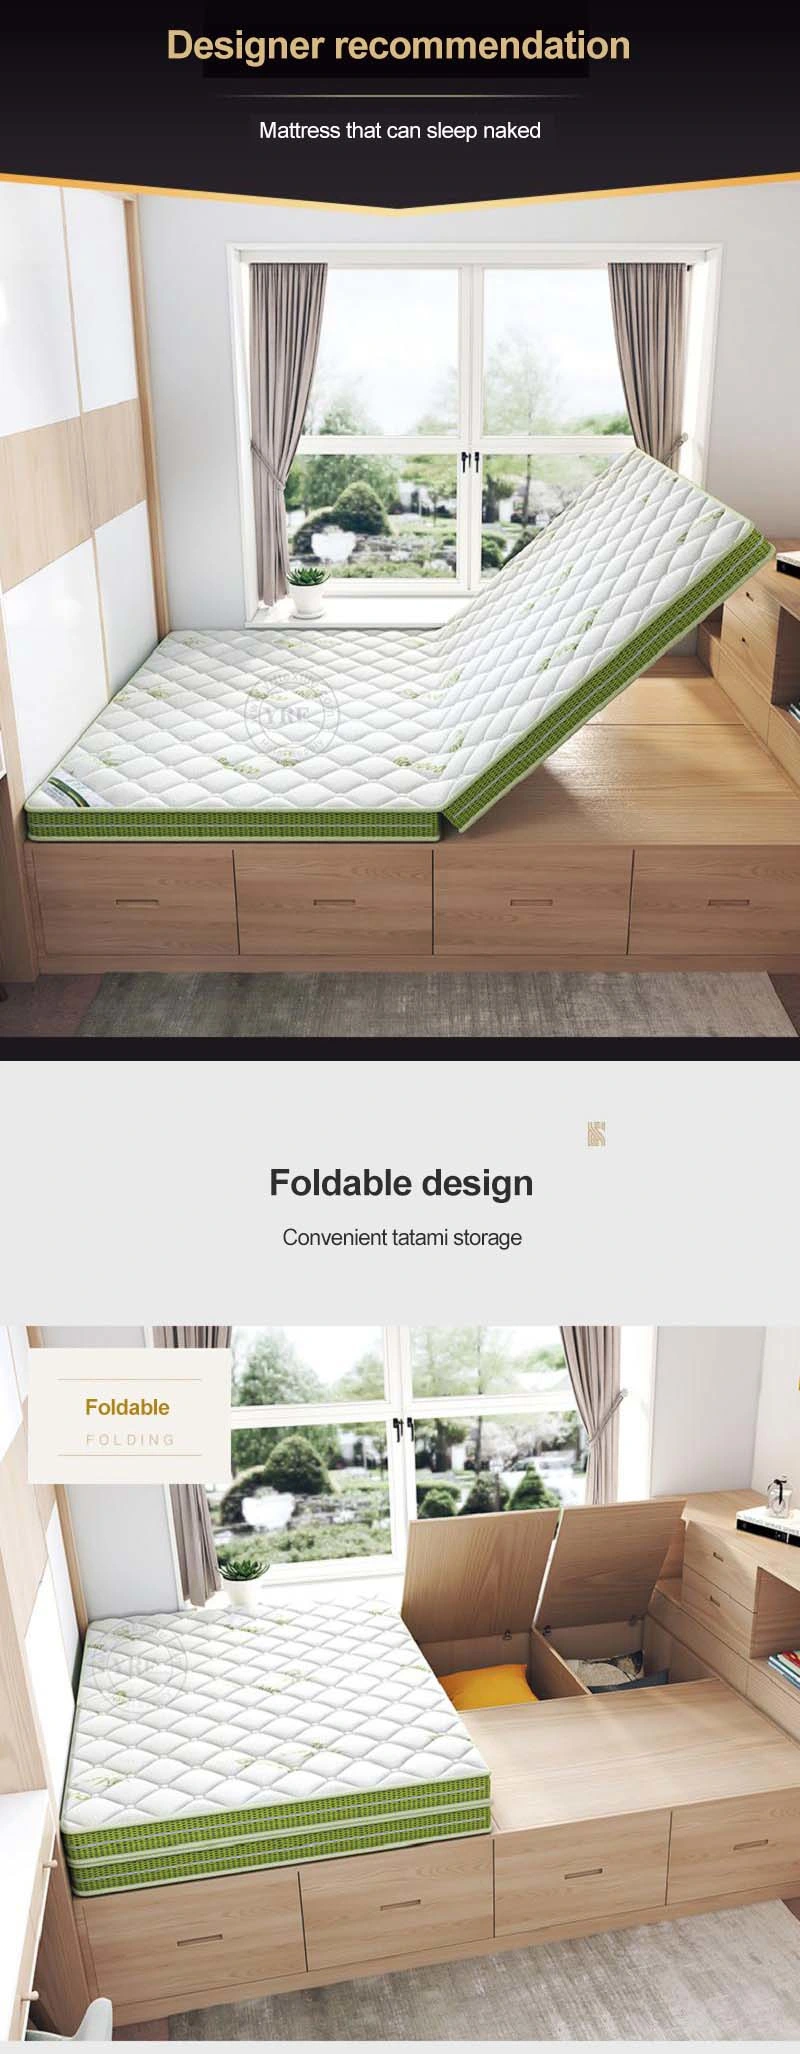 Home Palm Sleeping Tatami Two Foldable Detachable Washable 15cm Bed Bedroom